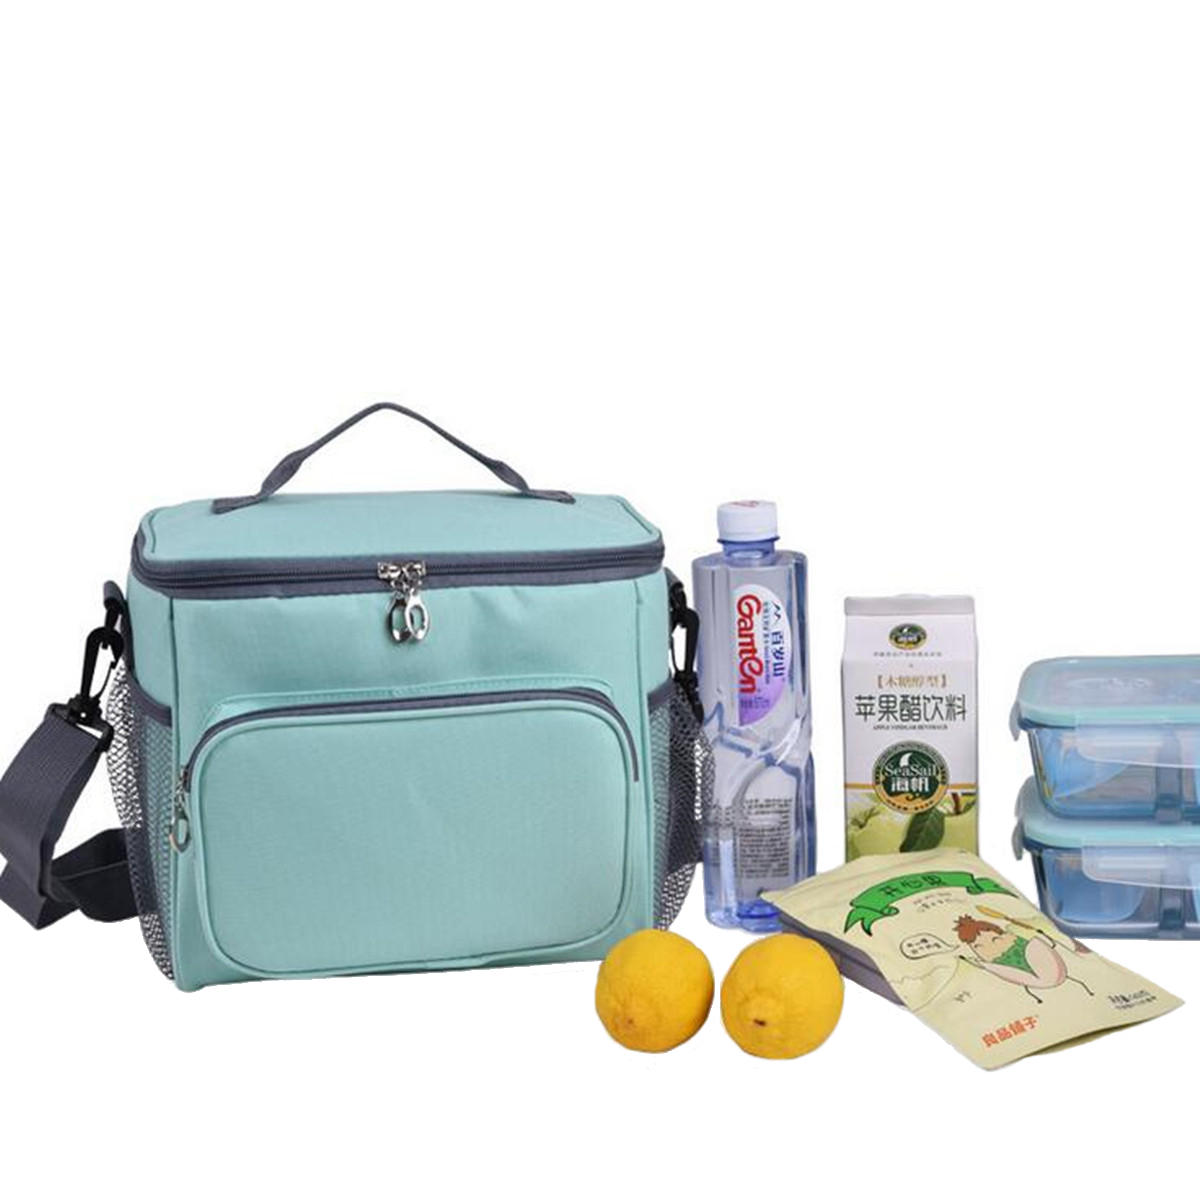 25.5x18x22.5cm Insulated Cooler Bag Kids Women Outdoor Picnic Container Thermal Lunch Bag Totes